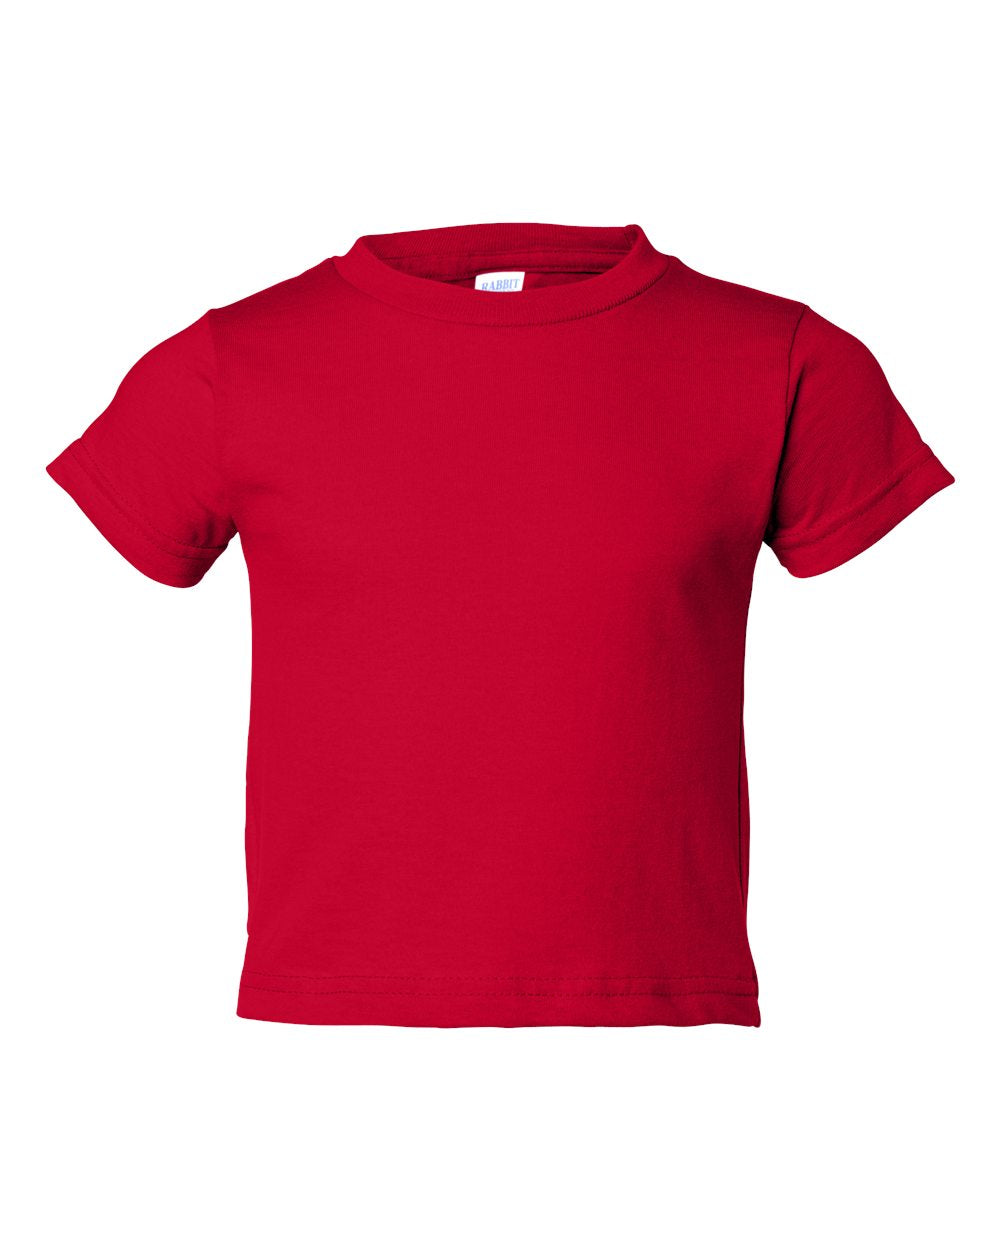 Toddler Jersey T-shirt, 100% Cotton, Red